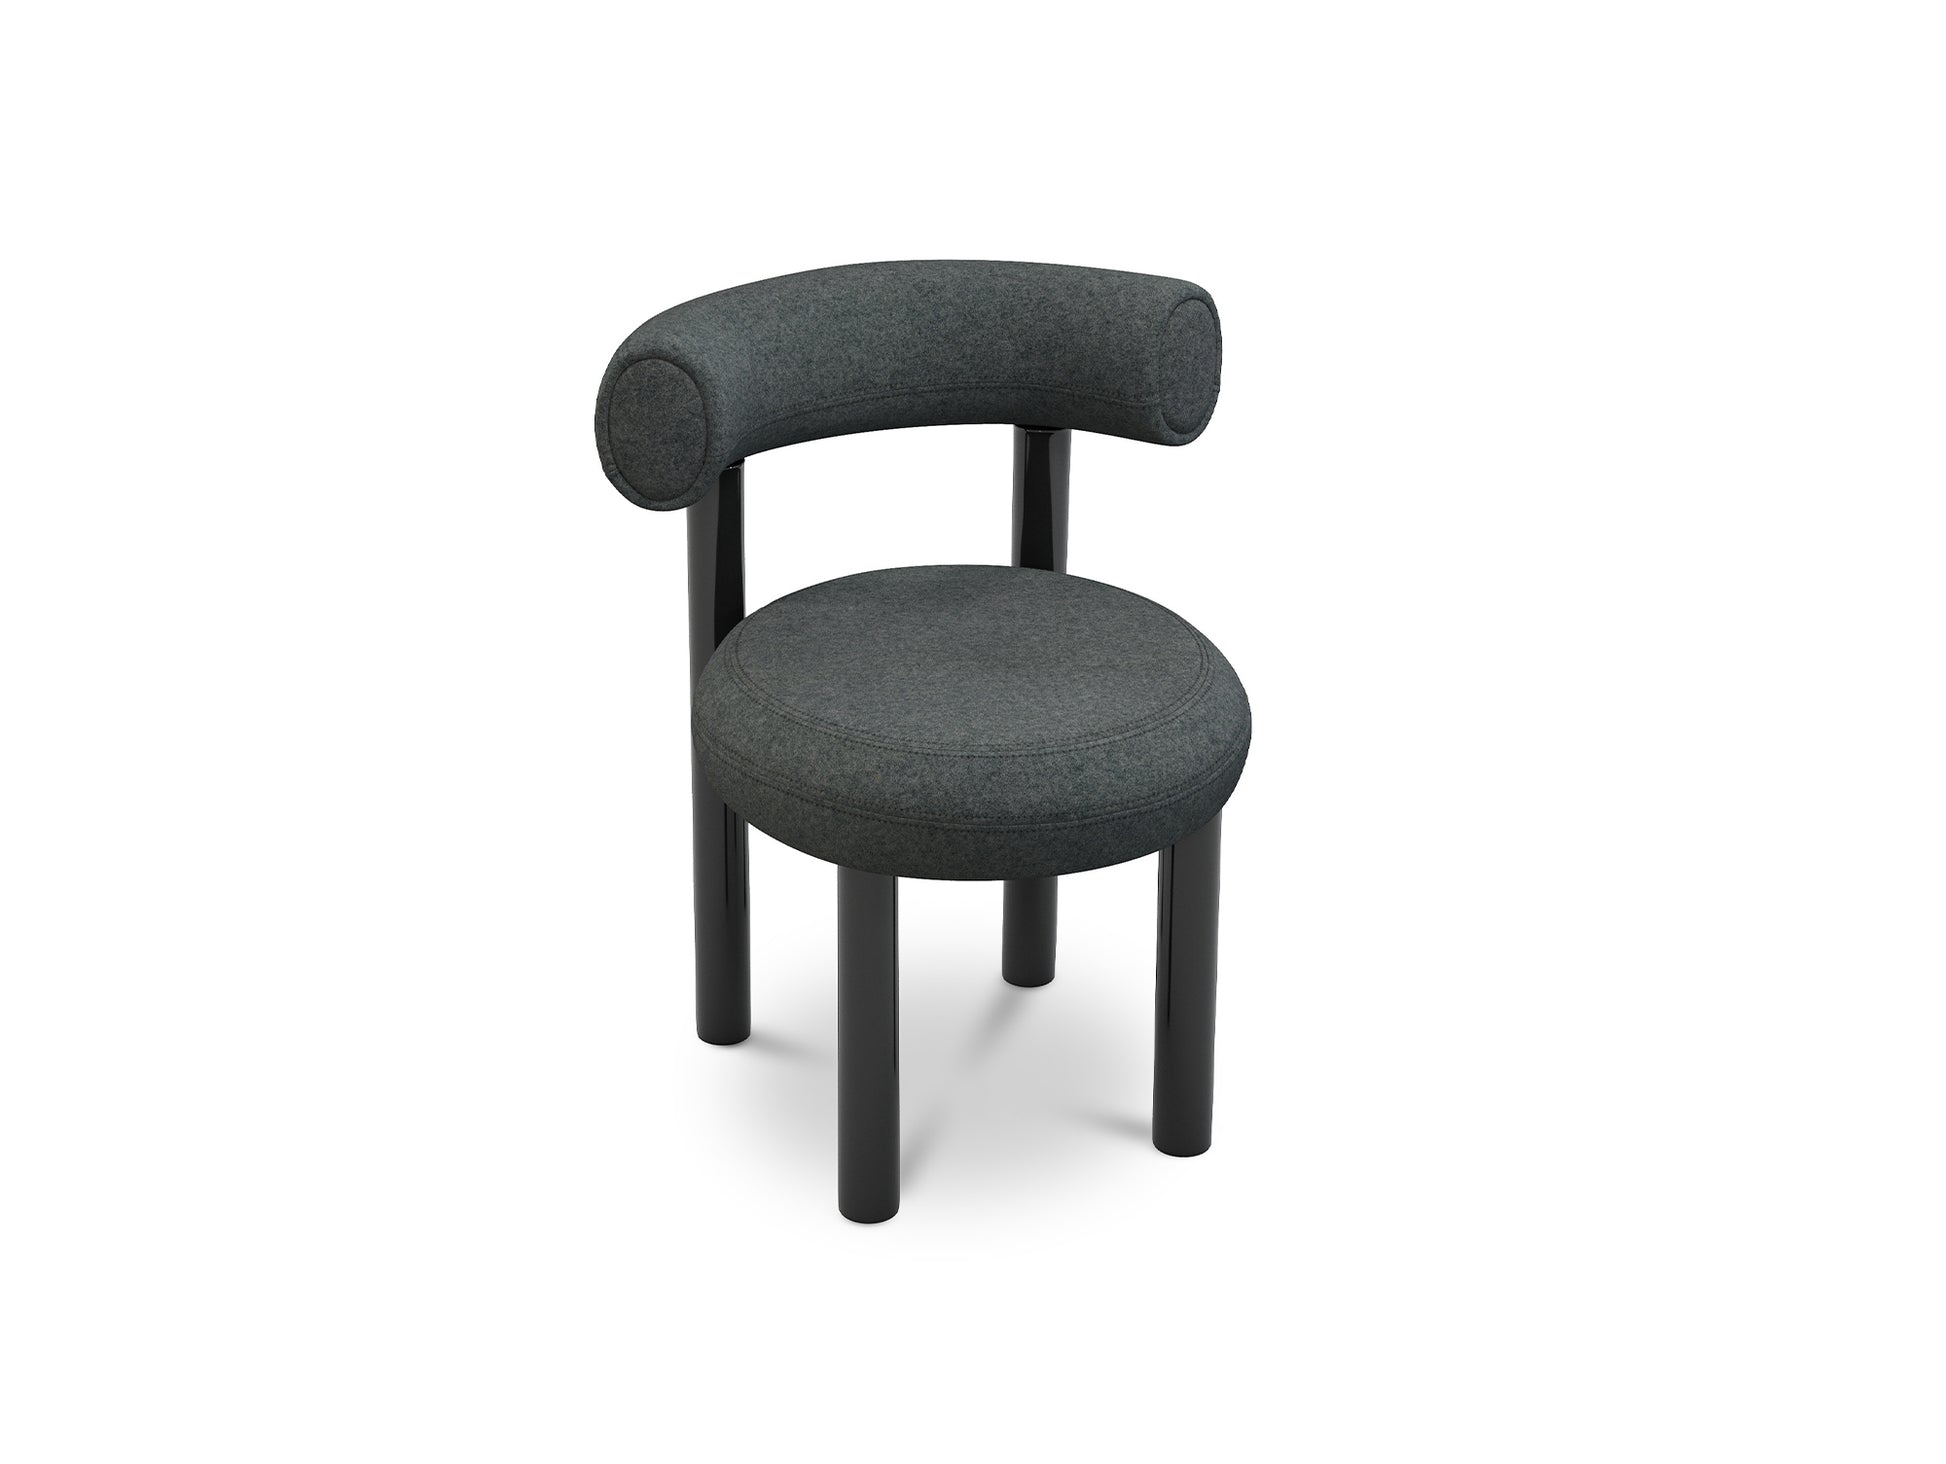 Fat Dining Chair by Tom Dixon - Divina Melange 3 170